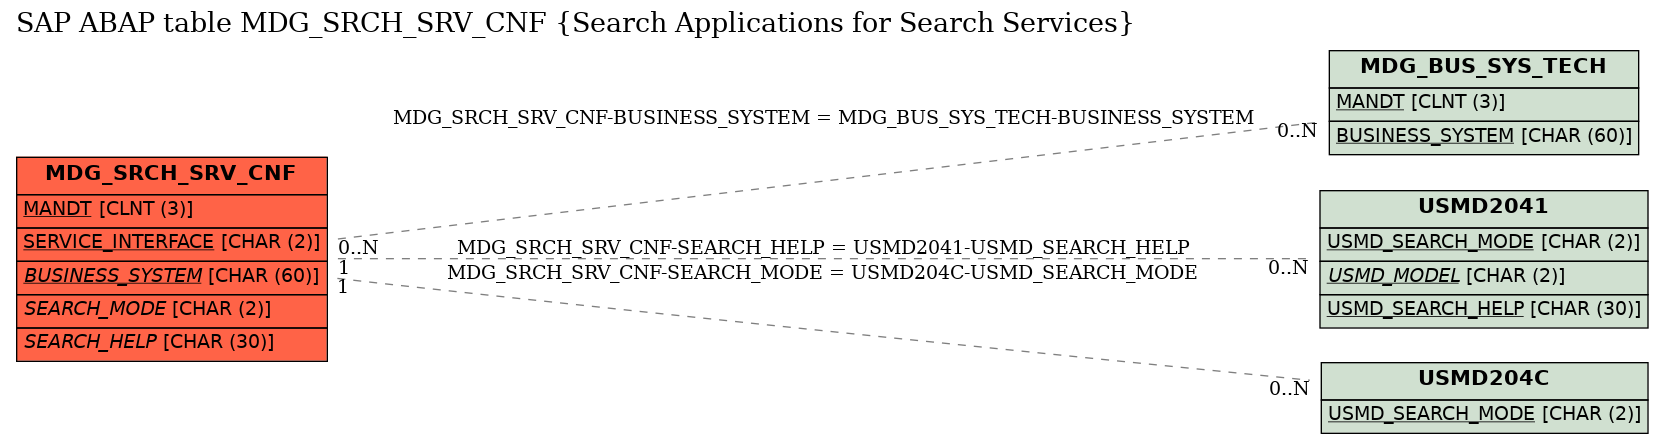 E-R Diagram for table MDG_SRCH_SRV_CNF (Search Applications for Search Services)